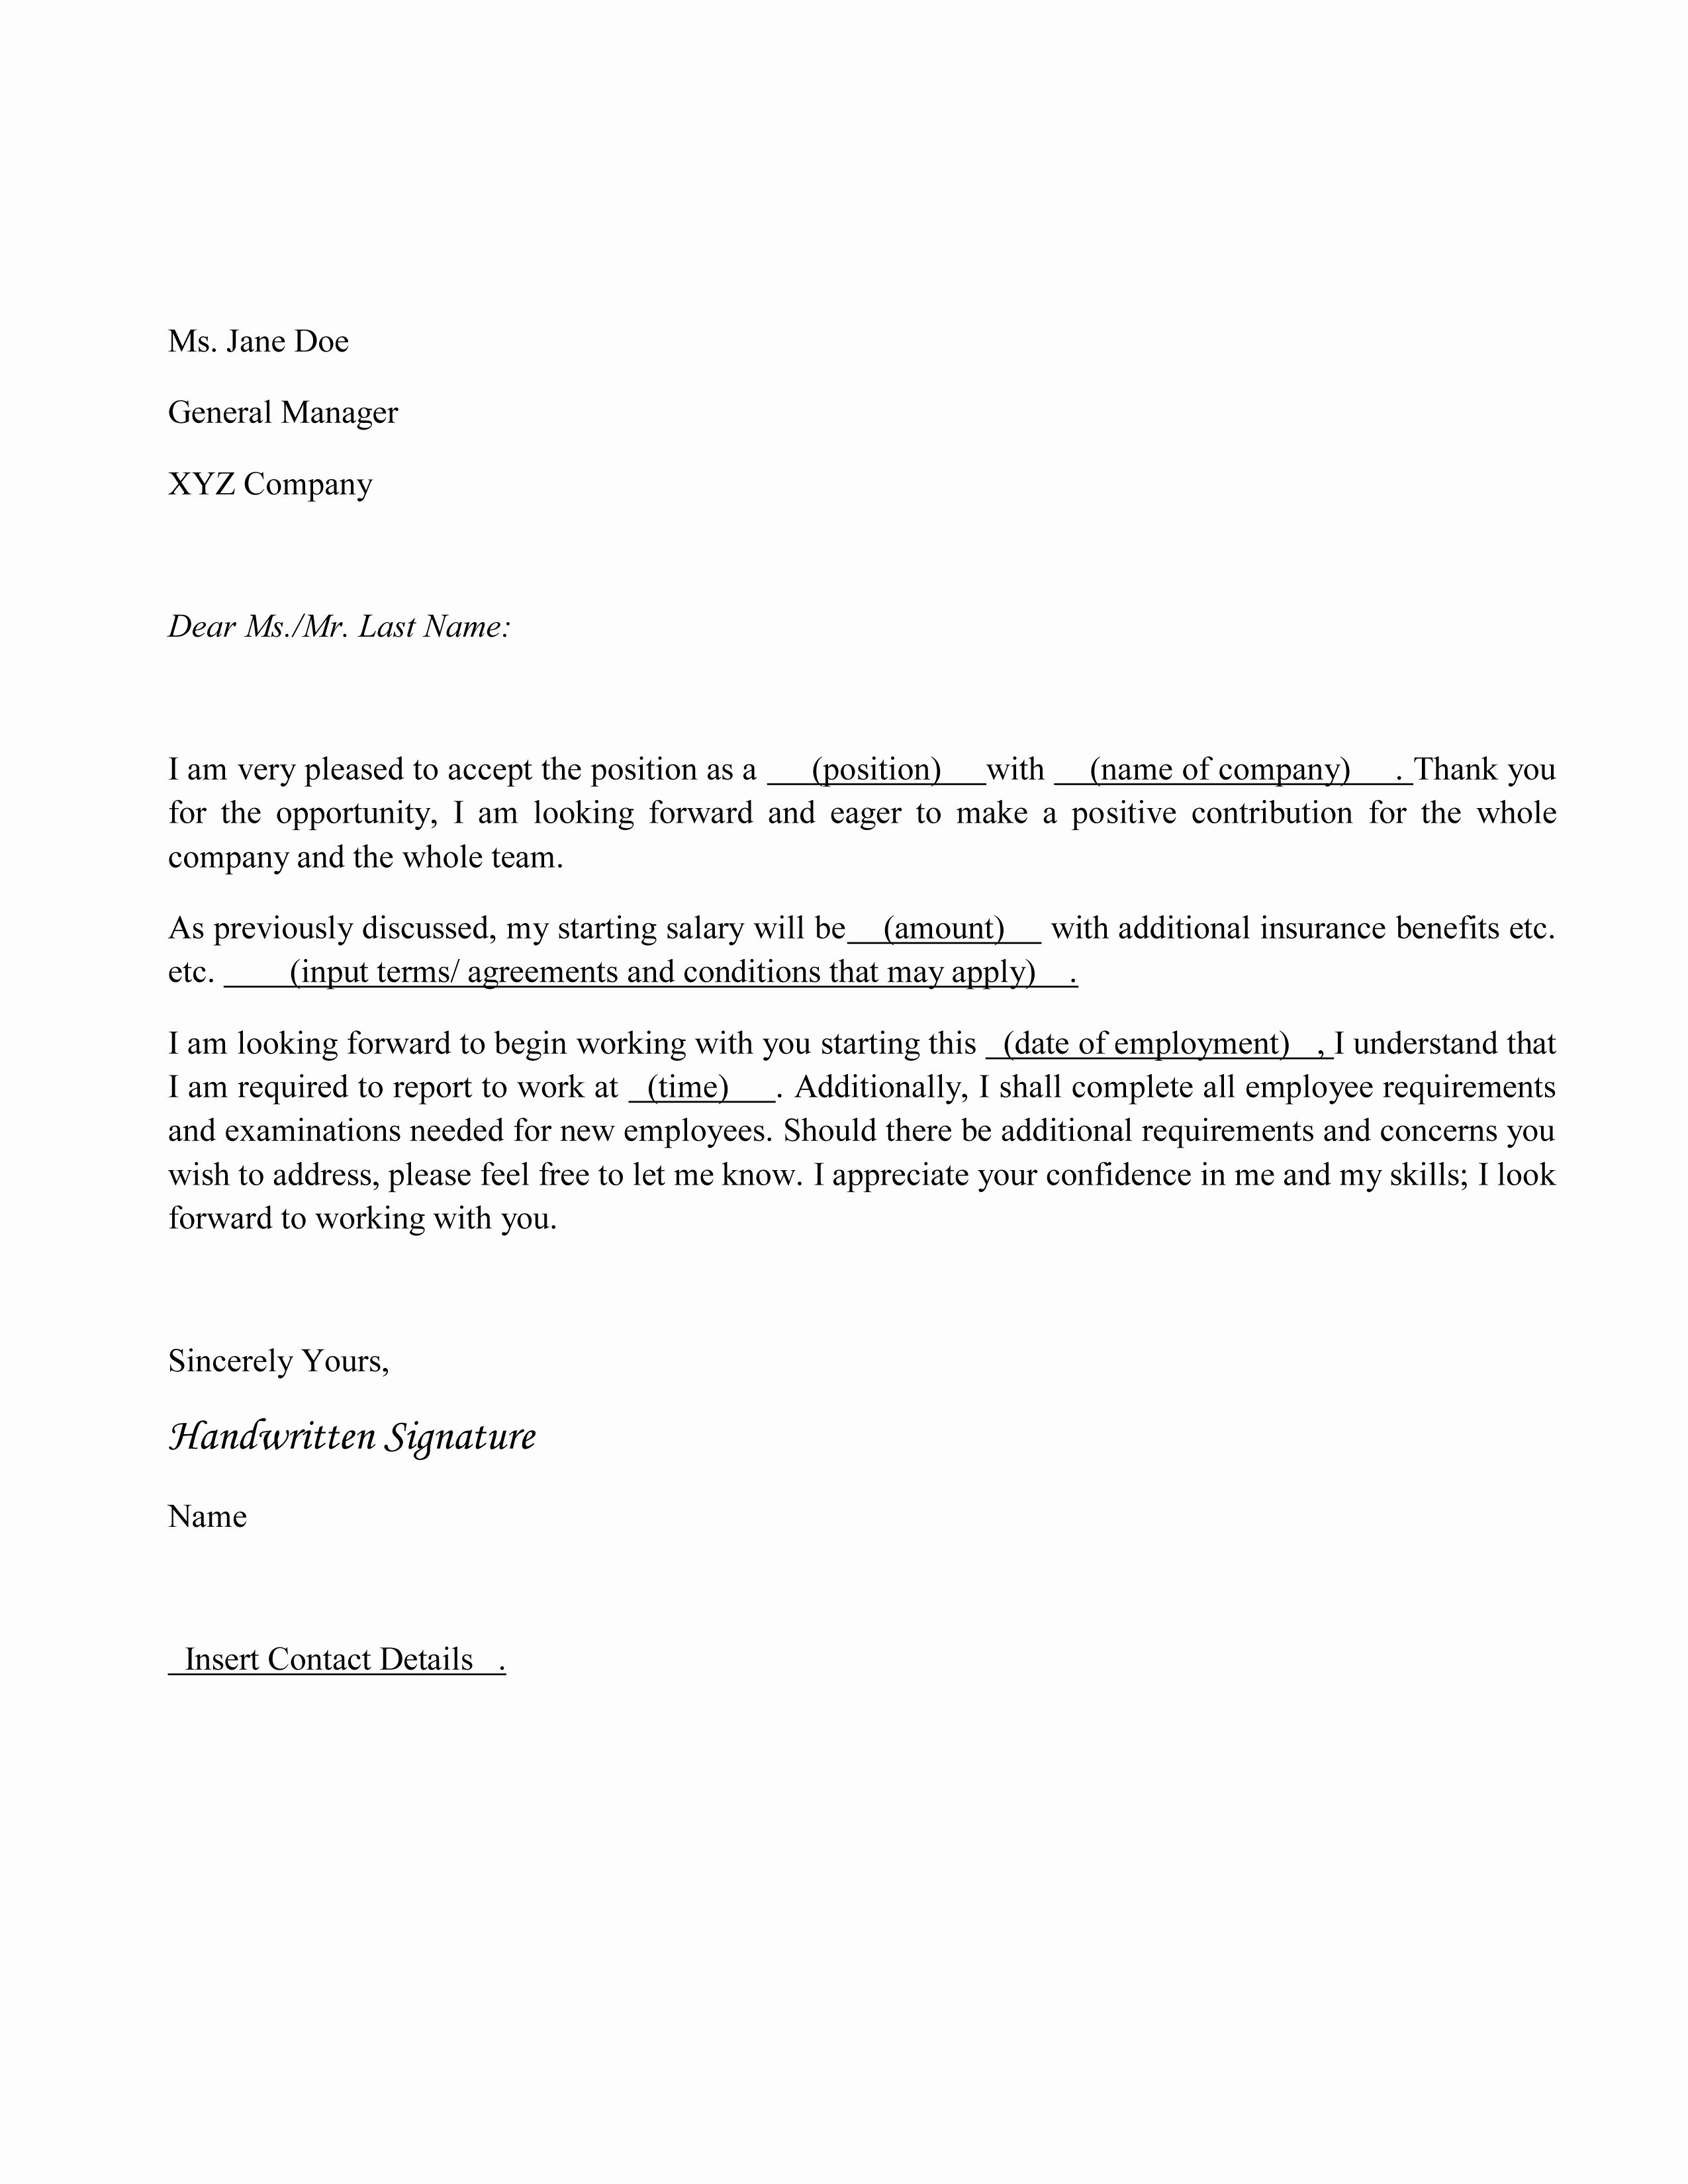 Job Acceptance Letter format Luxury How to Write A Job Acceptance Letter with Samples